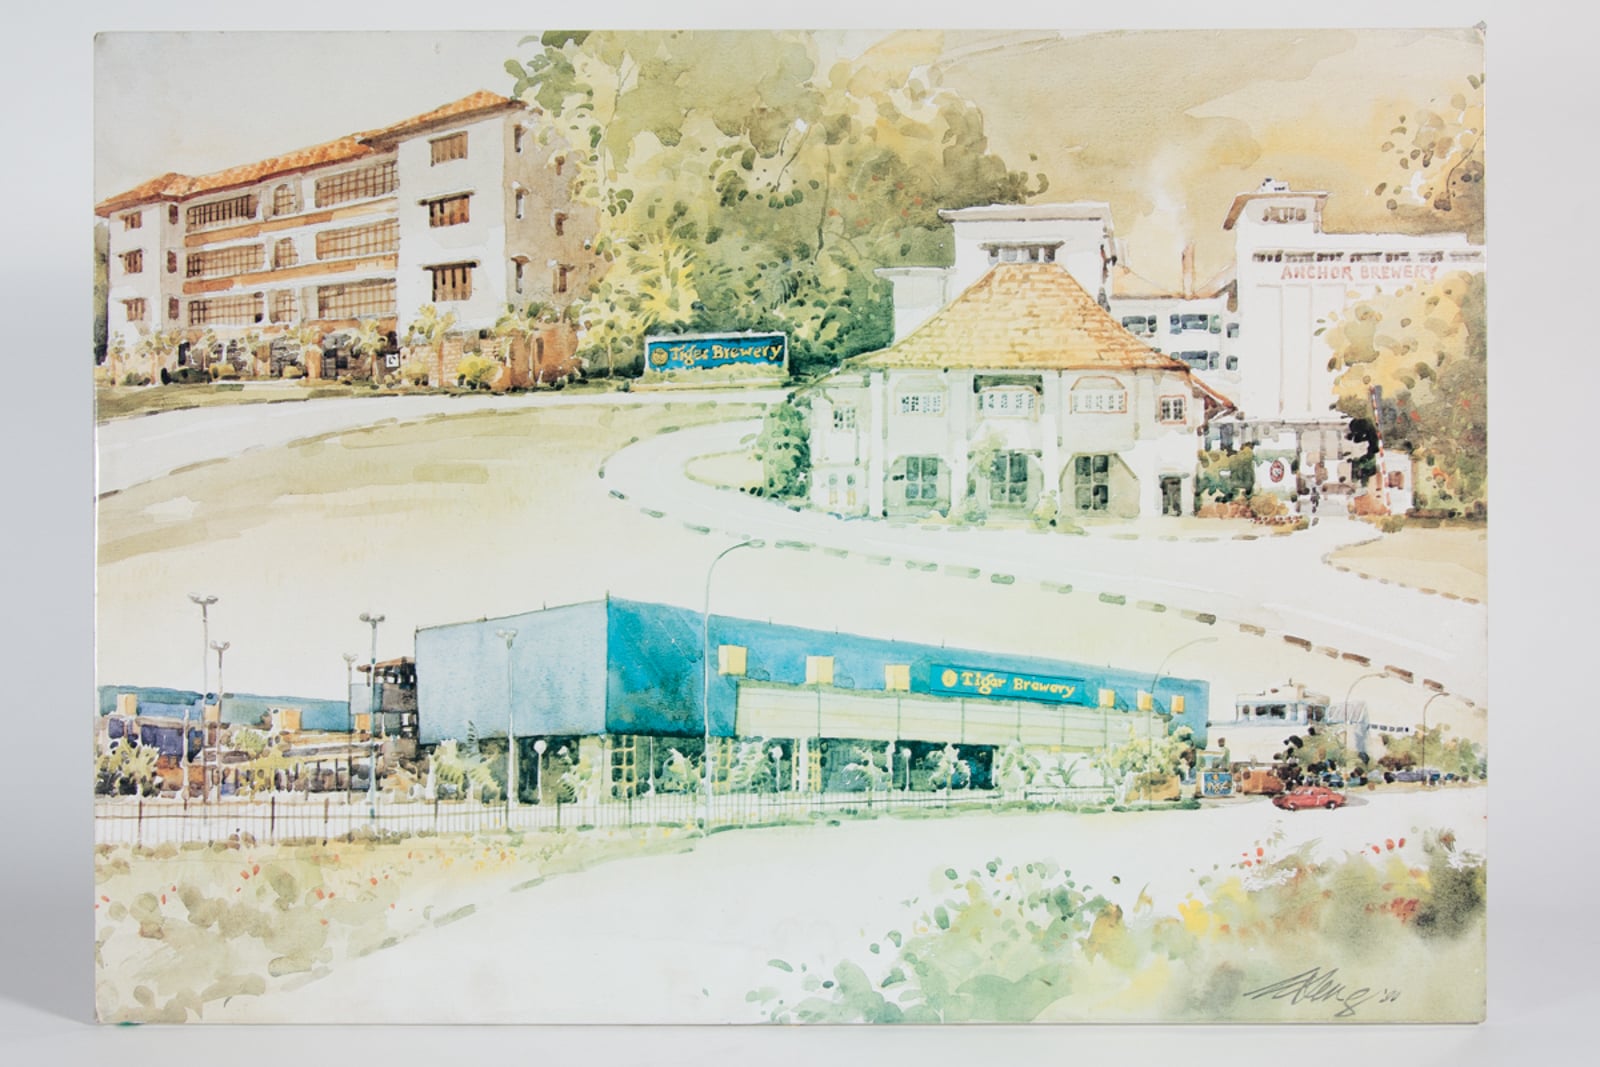 Reproduction of Ong Kim Seng's painting of Tiger Brewery, Anchor Brewery & Tiger Brewery Warehouse, 1990